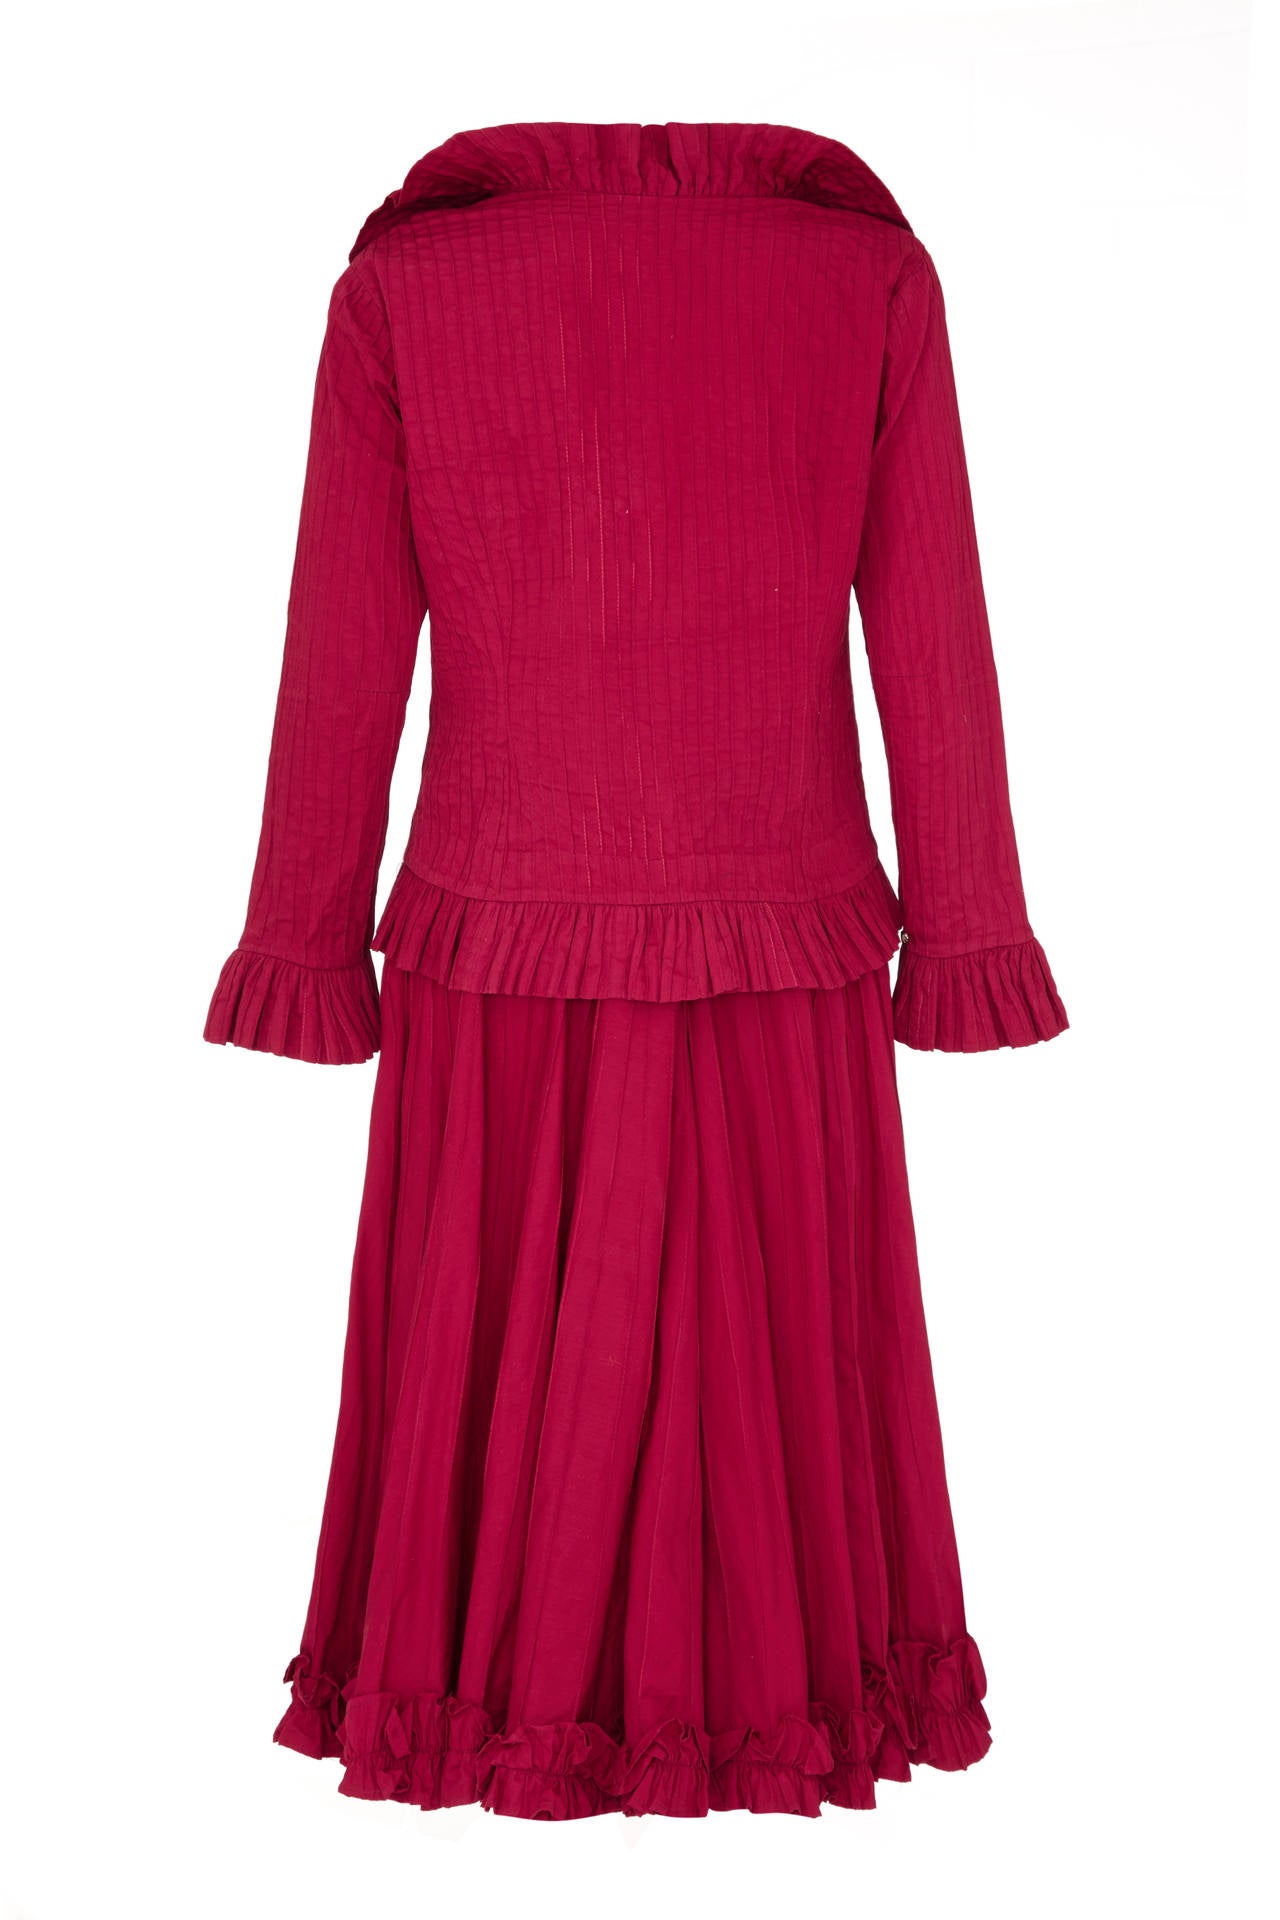 Tachi Castillo 1970s Deep Crimson Mexicana Blouse and Skirt Retailed at  Mexicana For Sale at 1stDibs